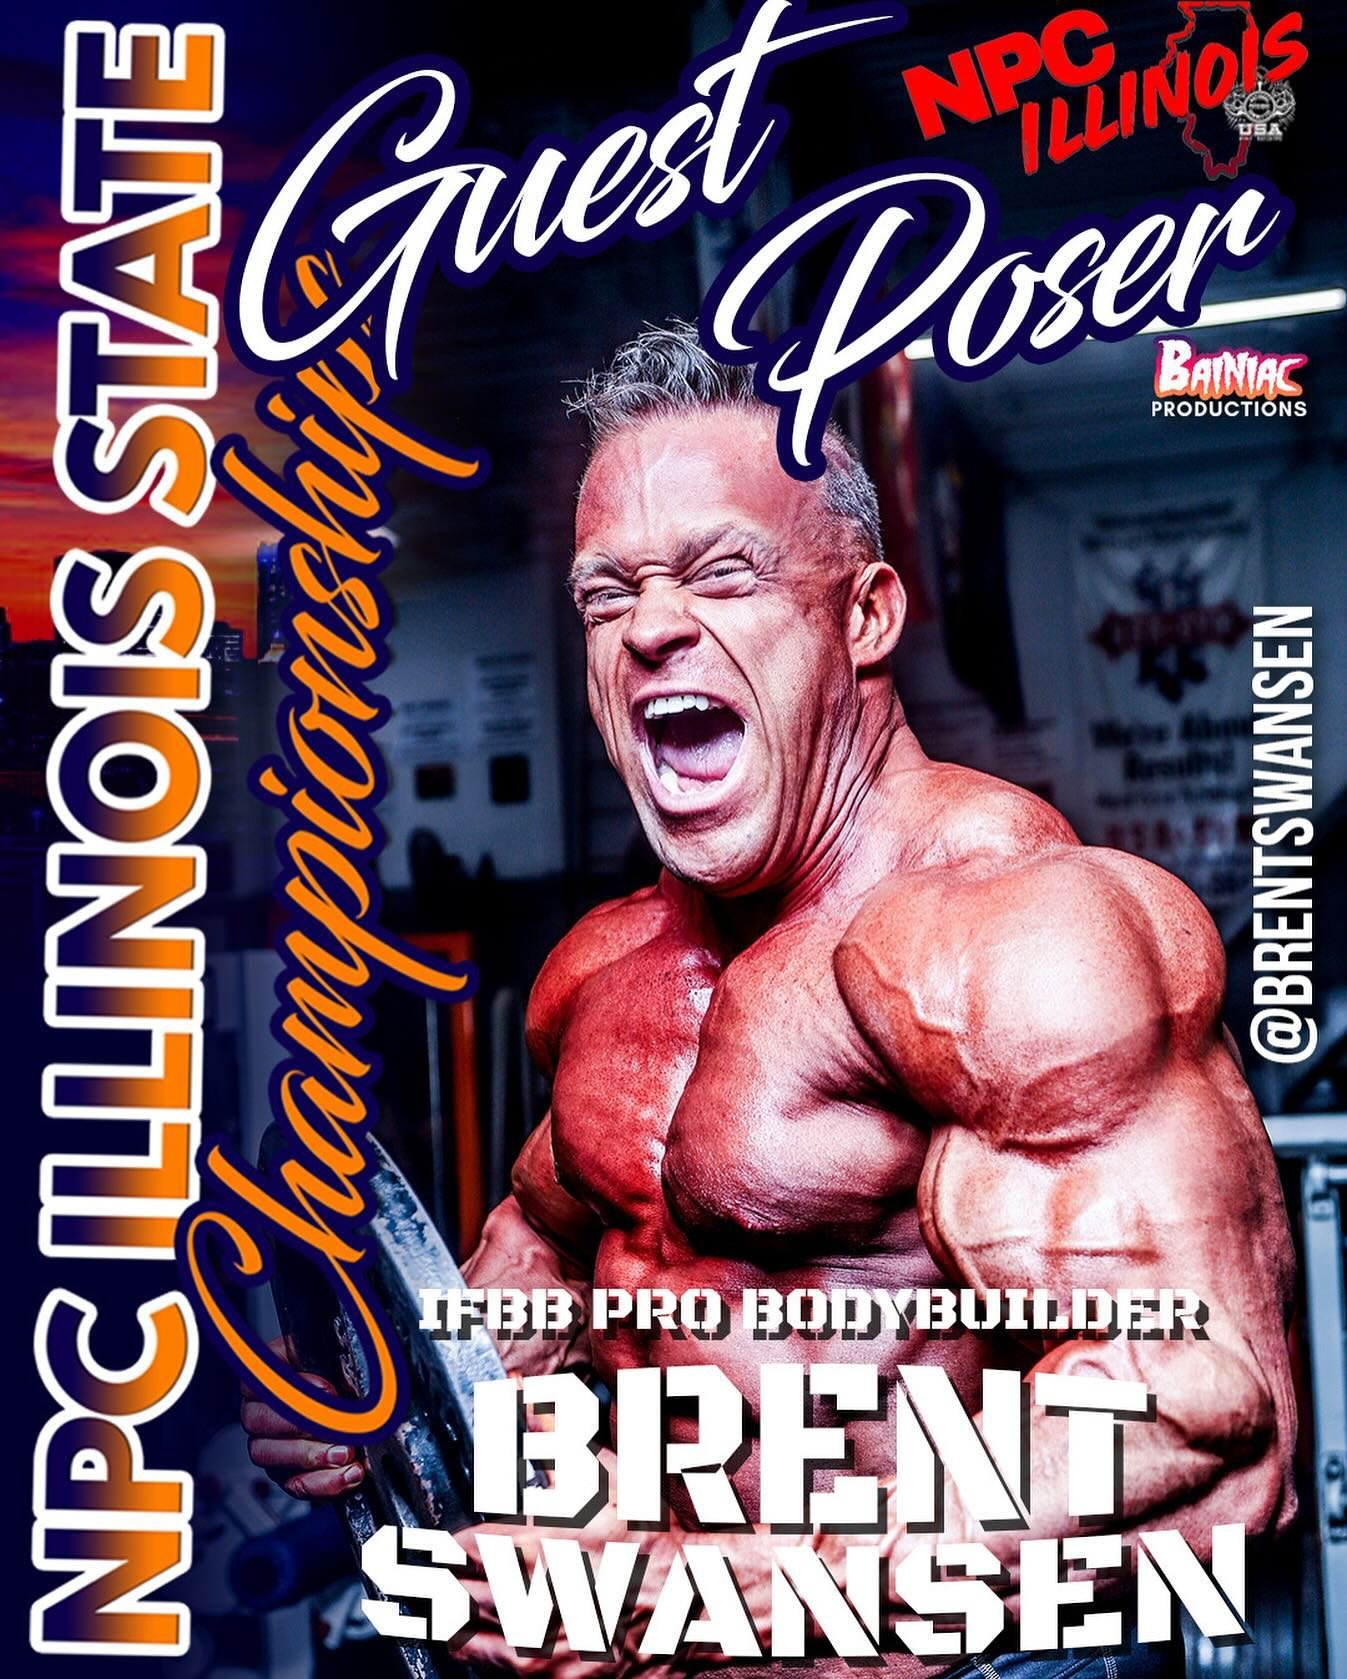 2 WEEKS‼️ NPC Illinois is proud to announce that IFBB Pro Bodybuilder Brent Swansen will be Guest Posing at the 2024 NPC Illinois State Championships! 💪🏆💪🏆💪
@brentswansen

-&mdash;&mdash;&mdash;&mdash;&mdash;&mdash;&mdash;&mdash;&mdash;

Registe